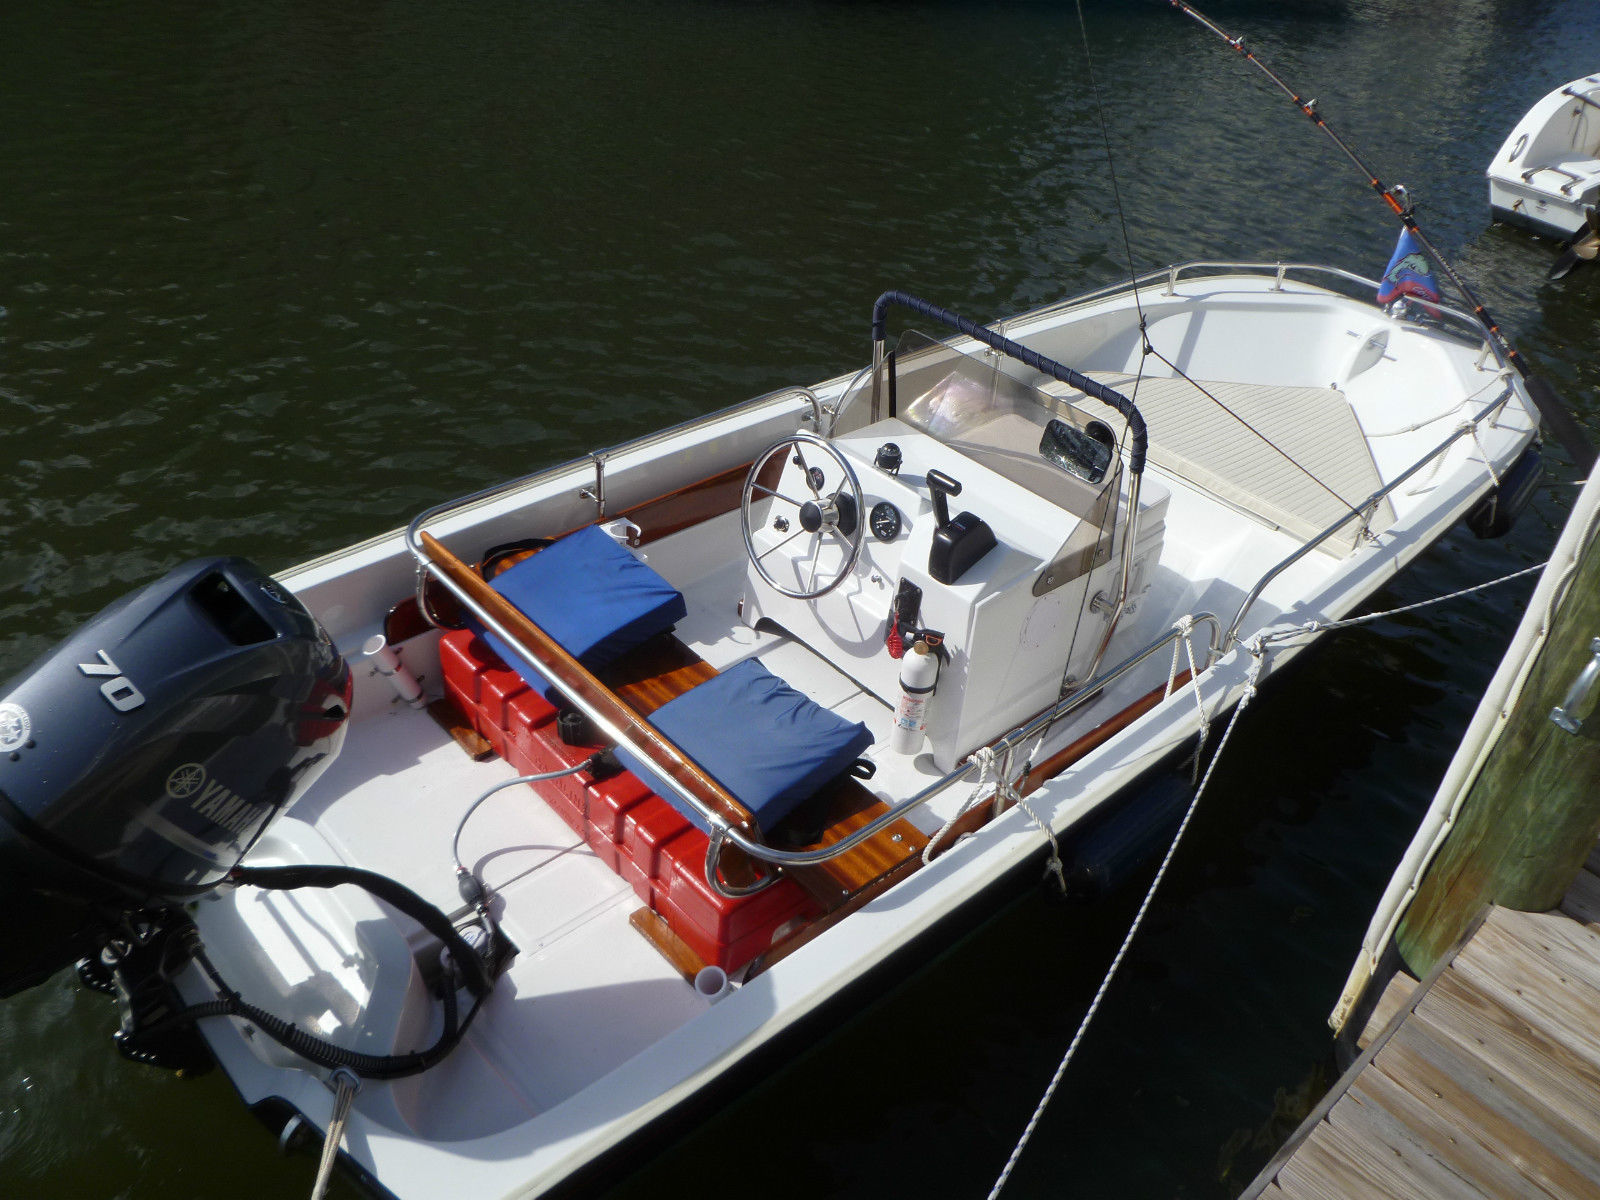 Boston Whaler Center Console 1988 for sale for $11,500 - Boats-from-USA.com...